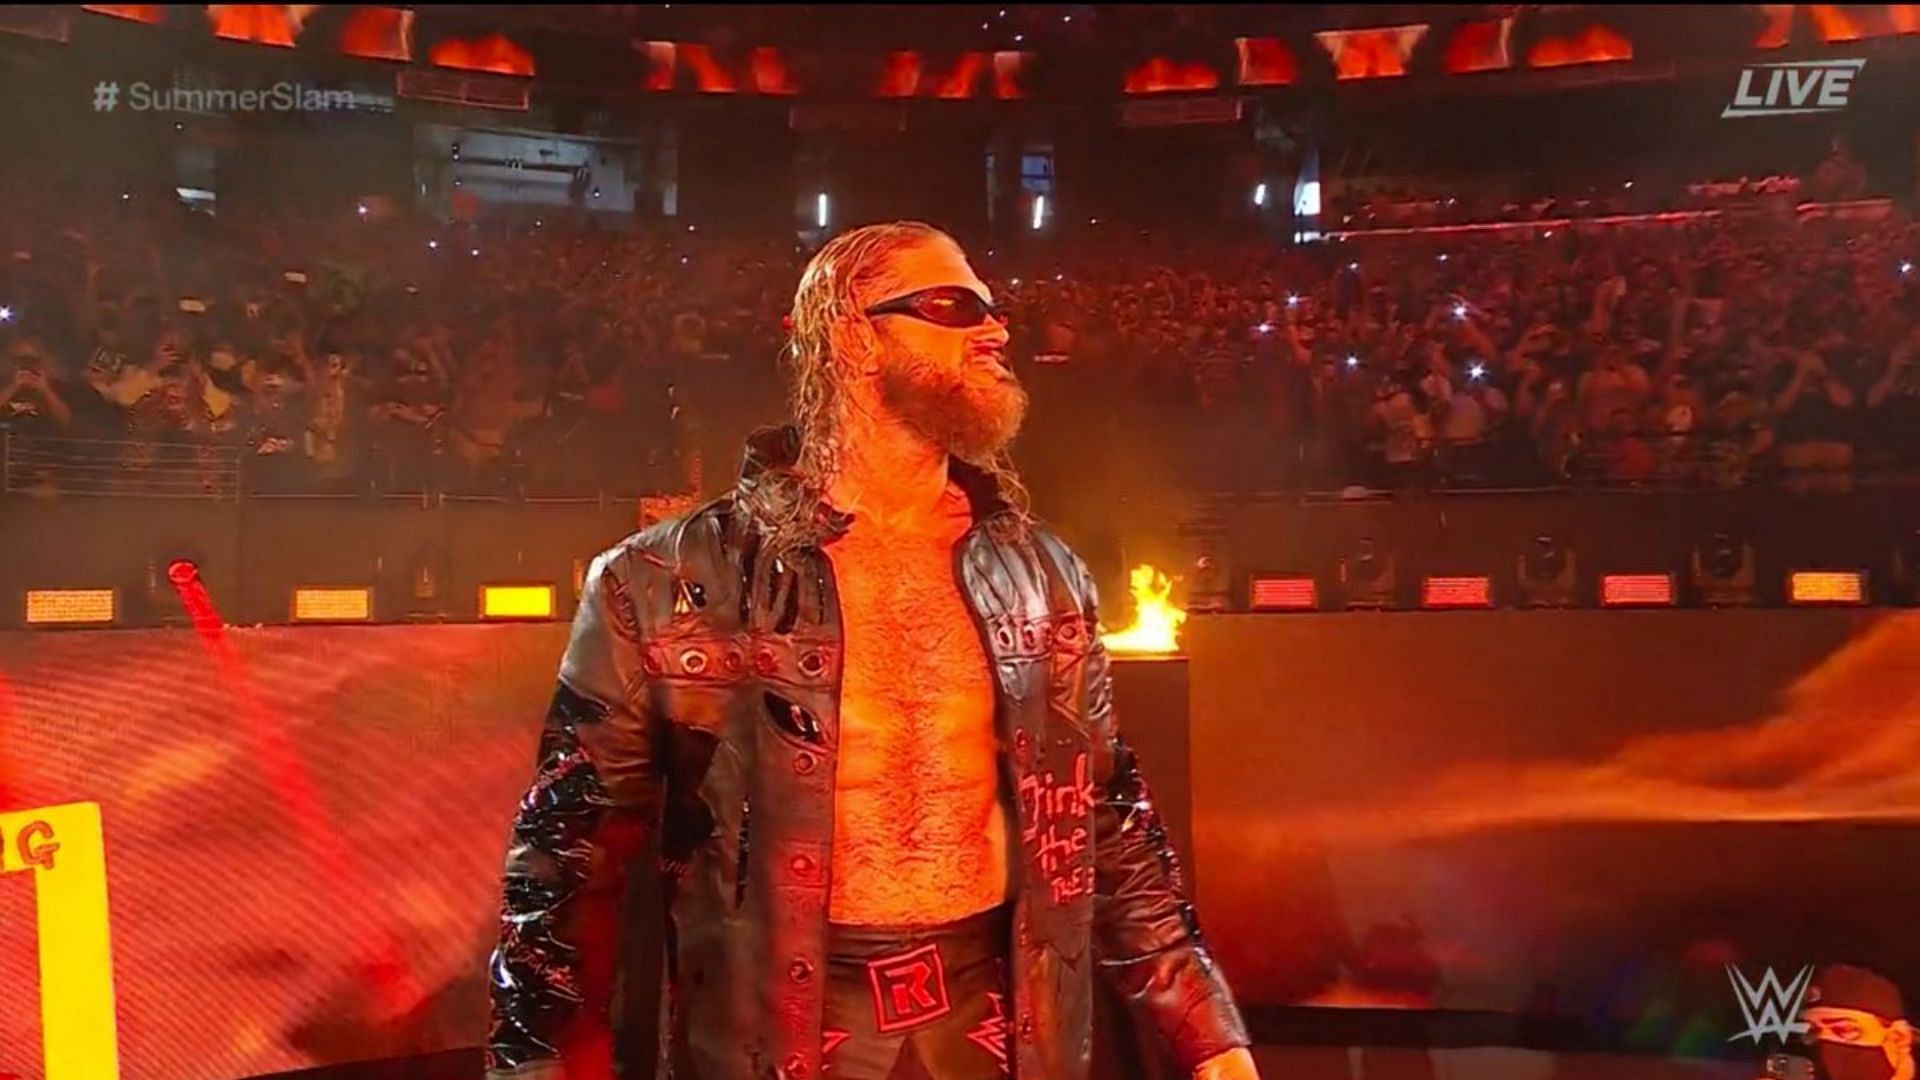 Edge had a special entrance at SummerSlam 2021